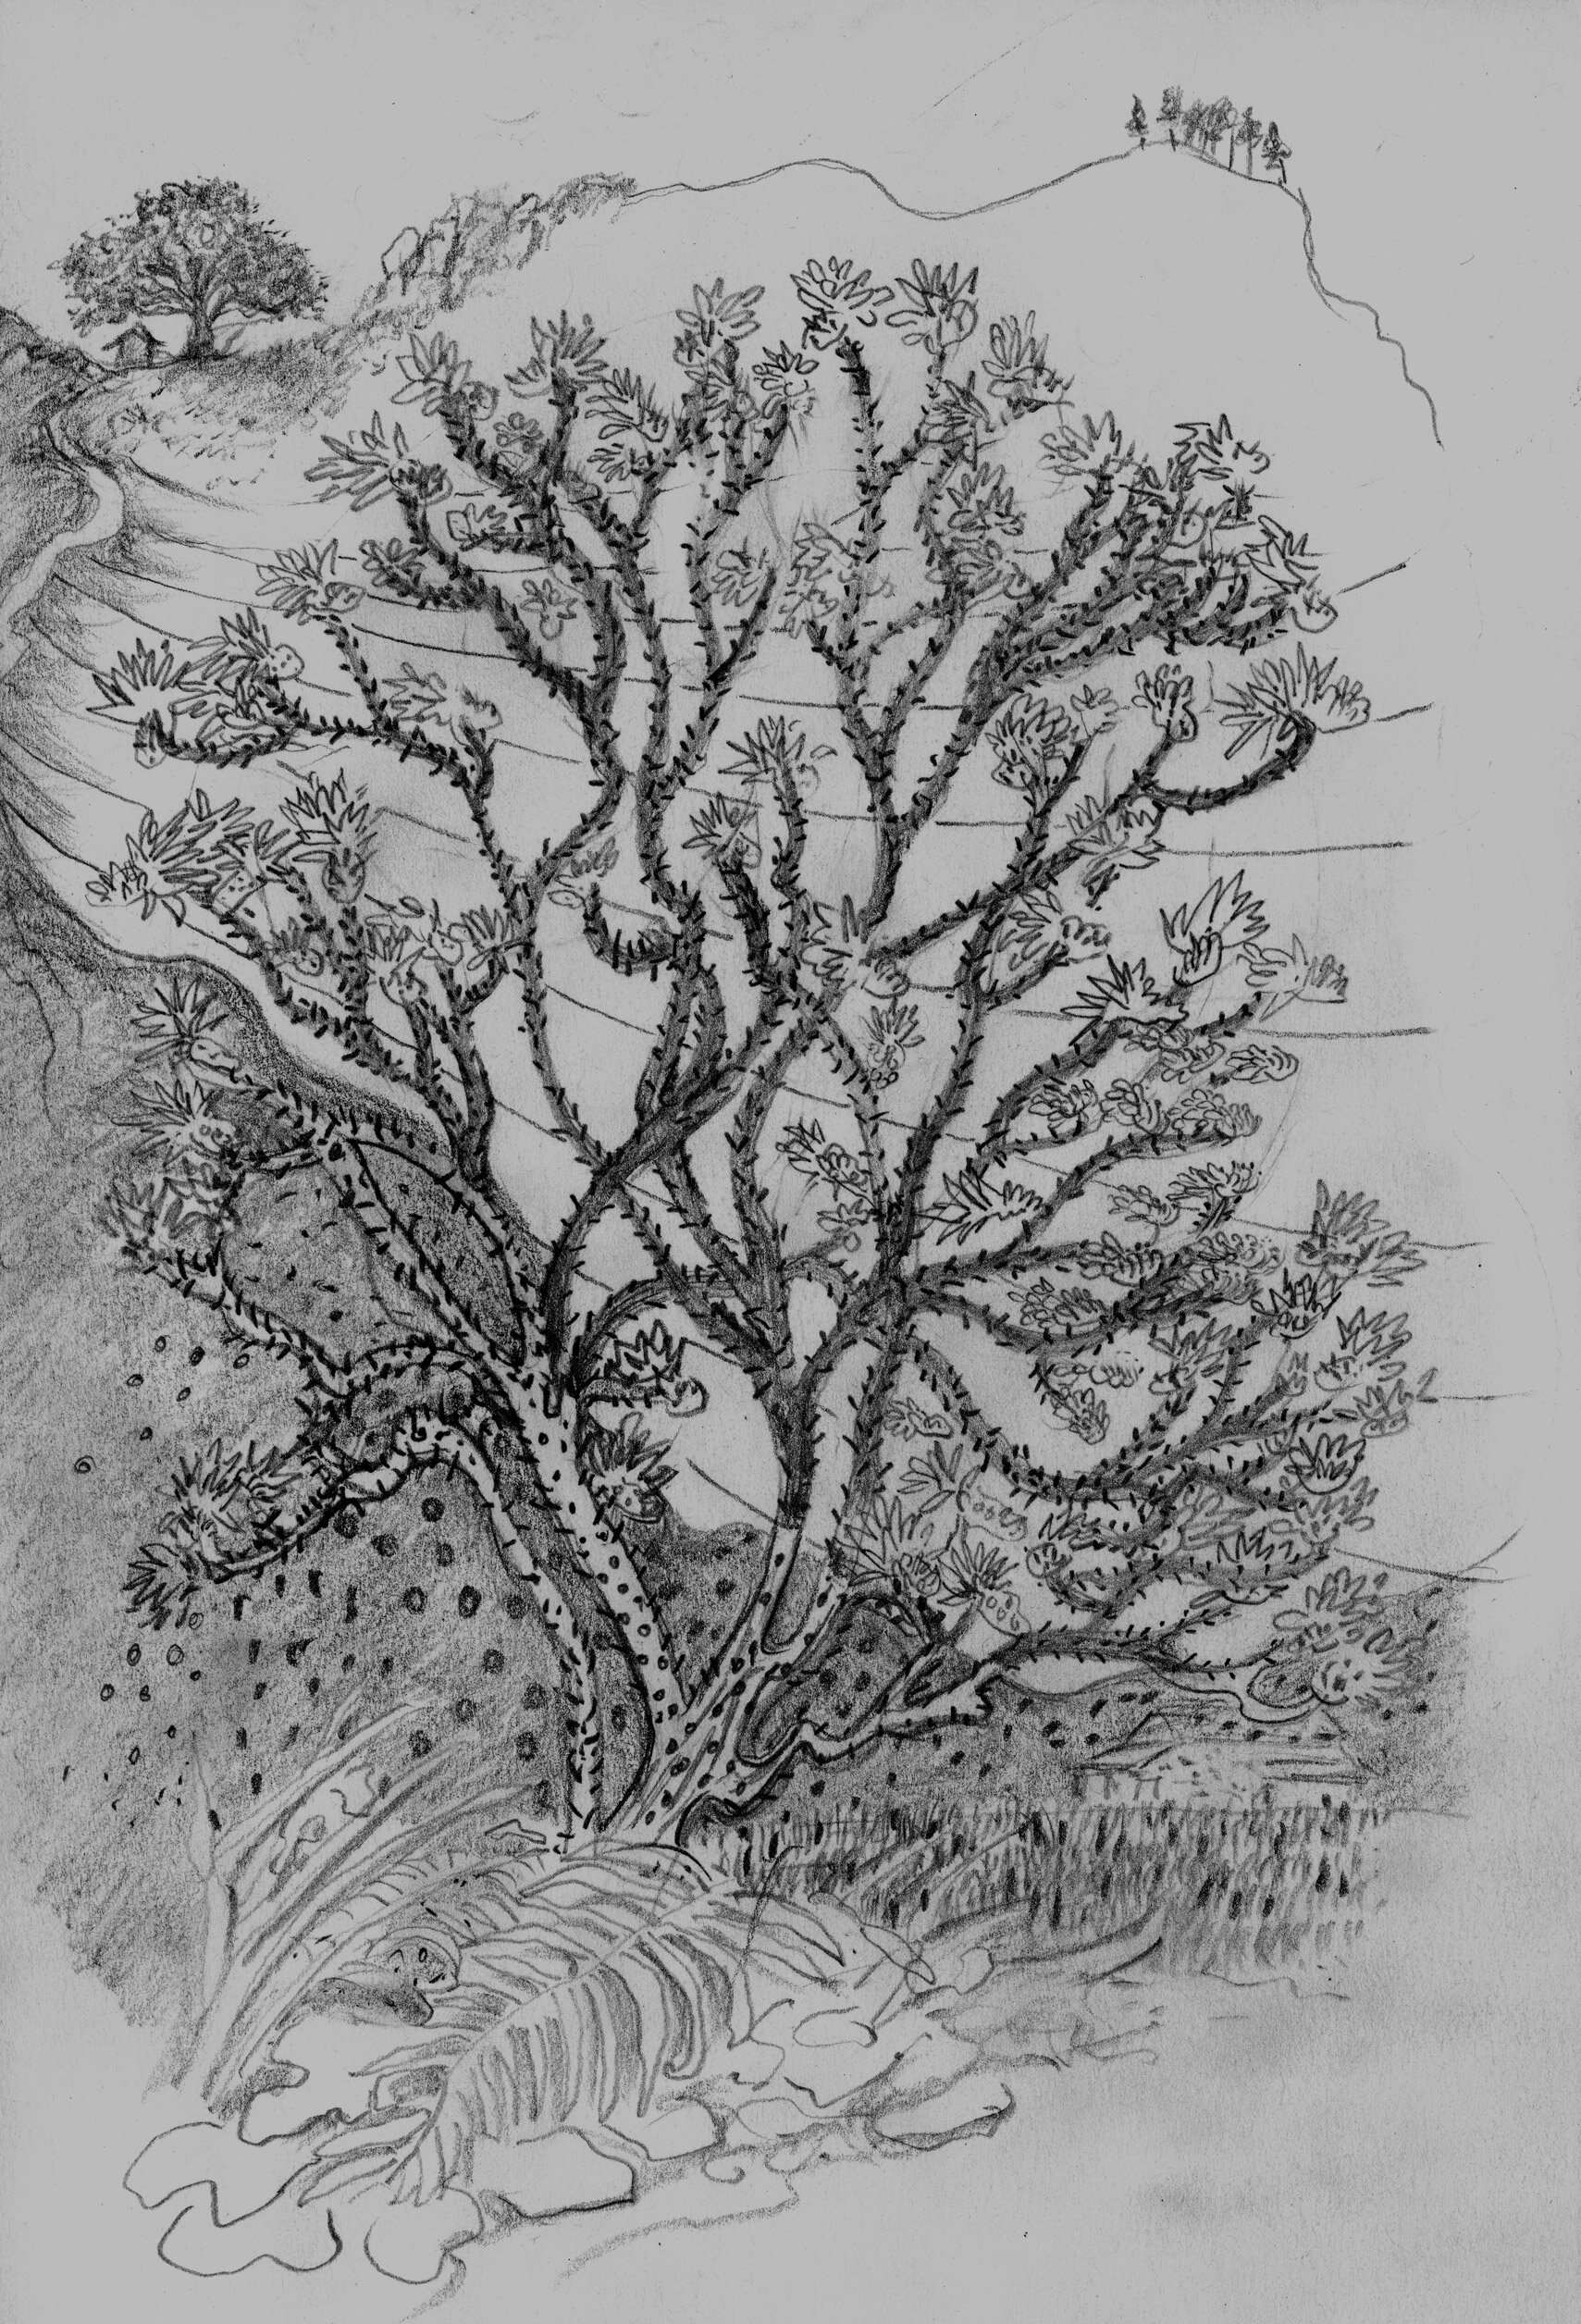   Bandipur Nepal Simla Tree  2017 Pencil on paper 8x5 inches 